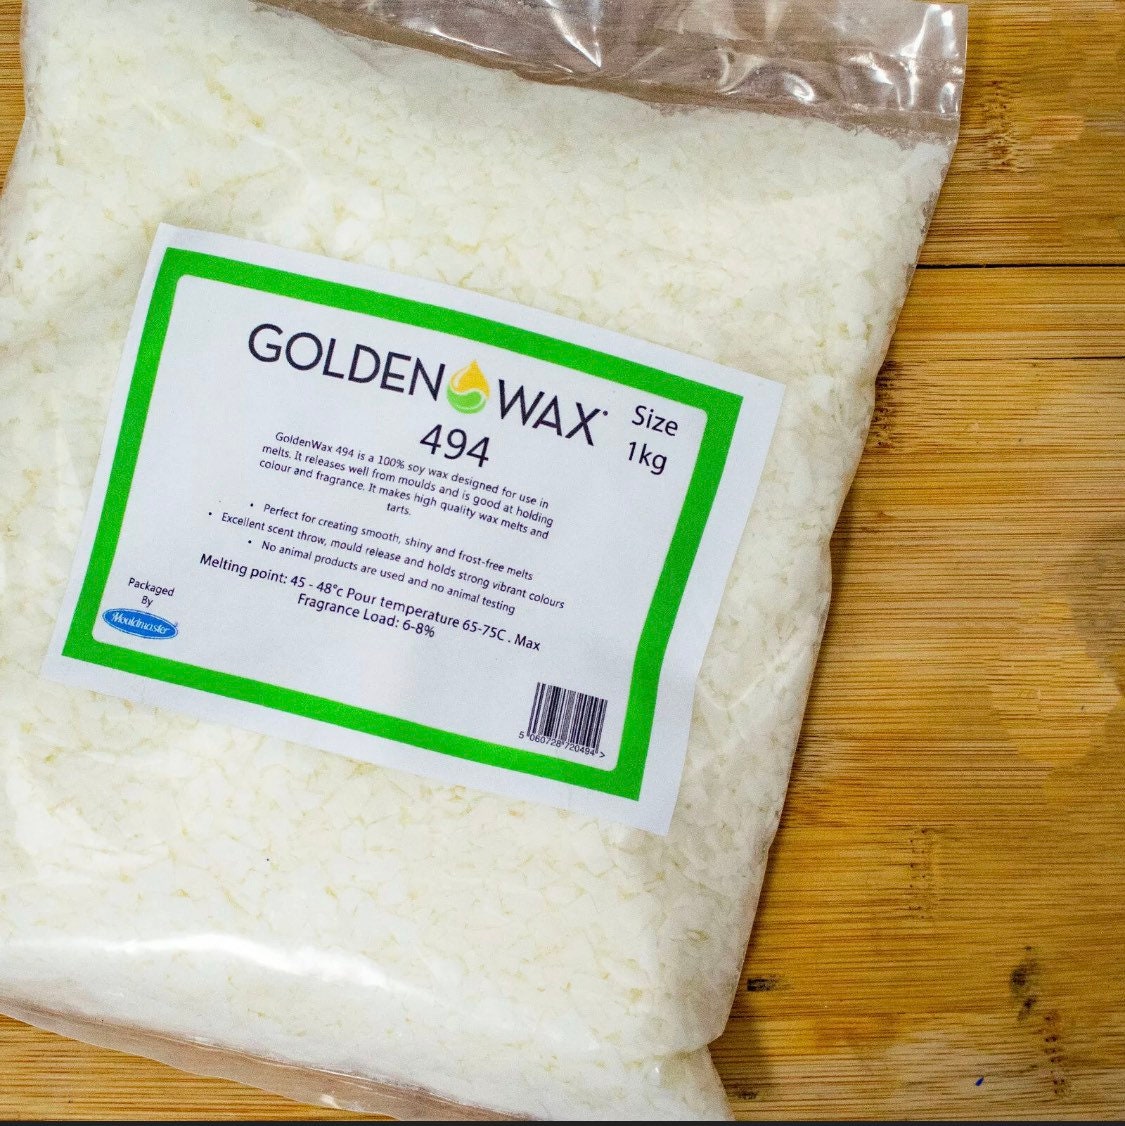 1KG Natural Soy Wax Granular Scented Candle Raw Material 100% No